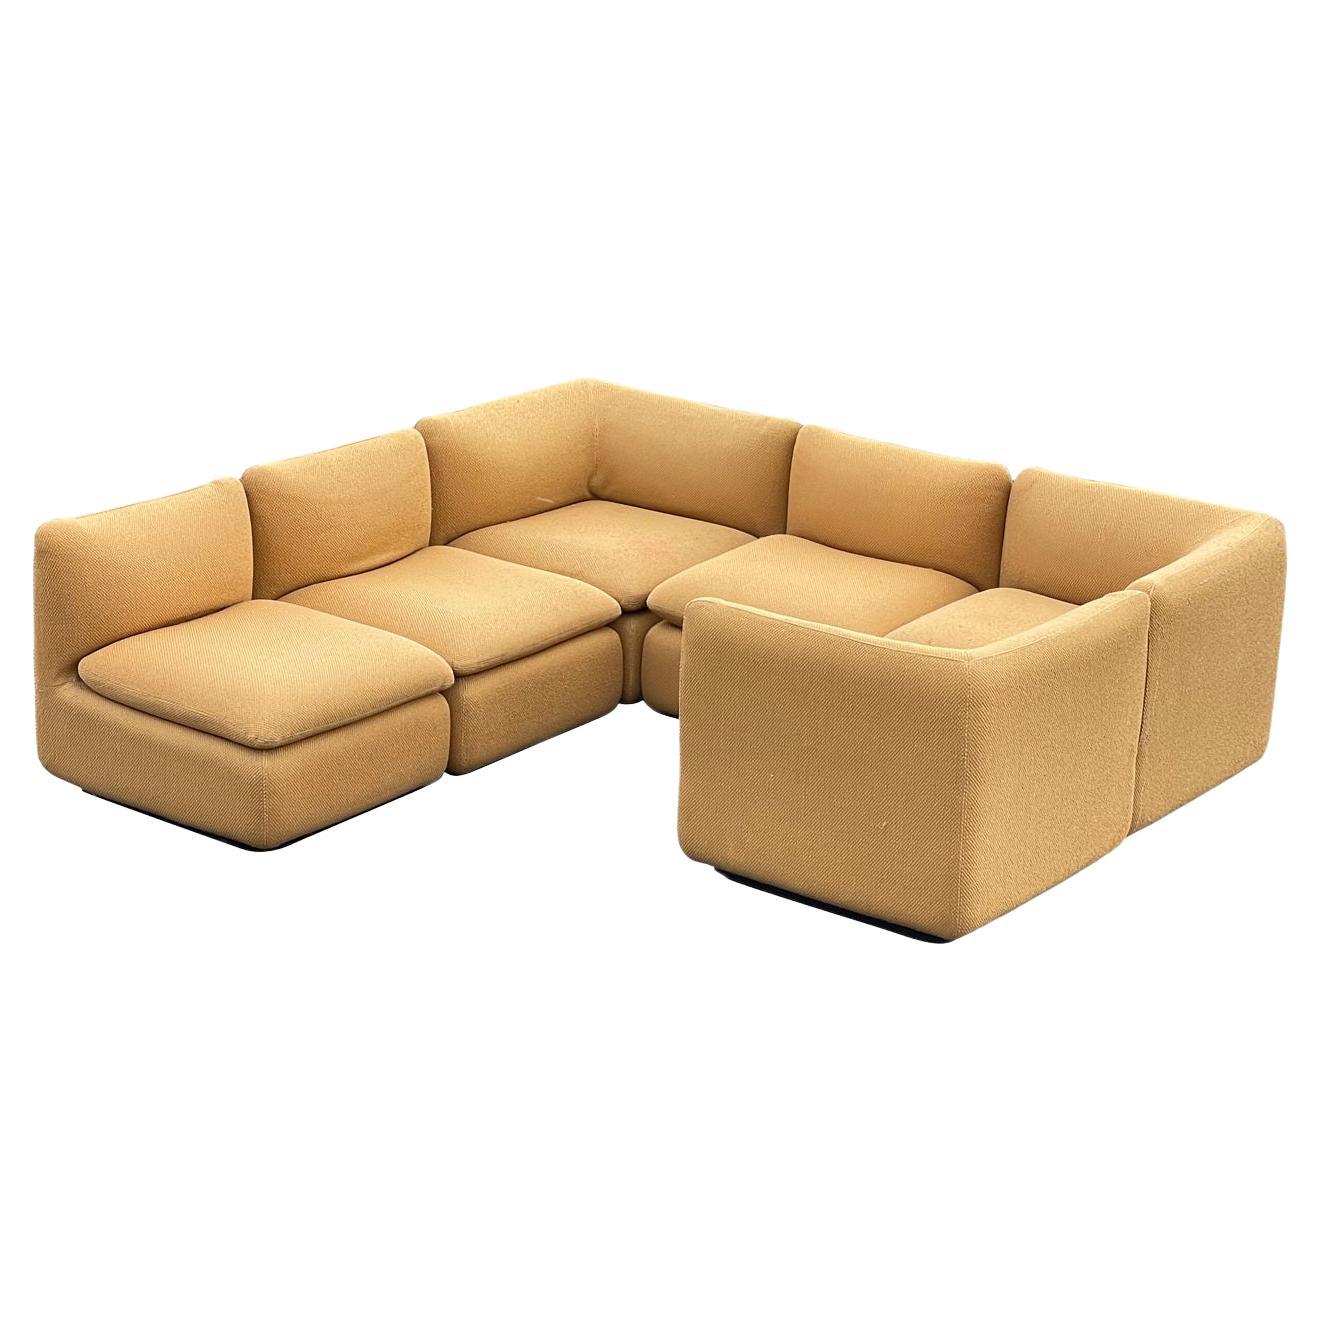 1980s Modular Ganging ELYSÉE Sofa Unit Sectional by Steelcase  For Sale